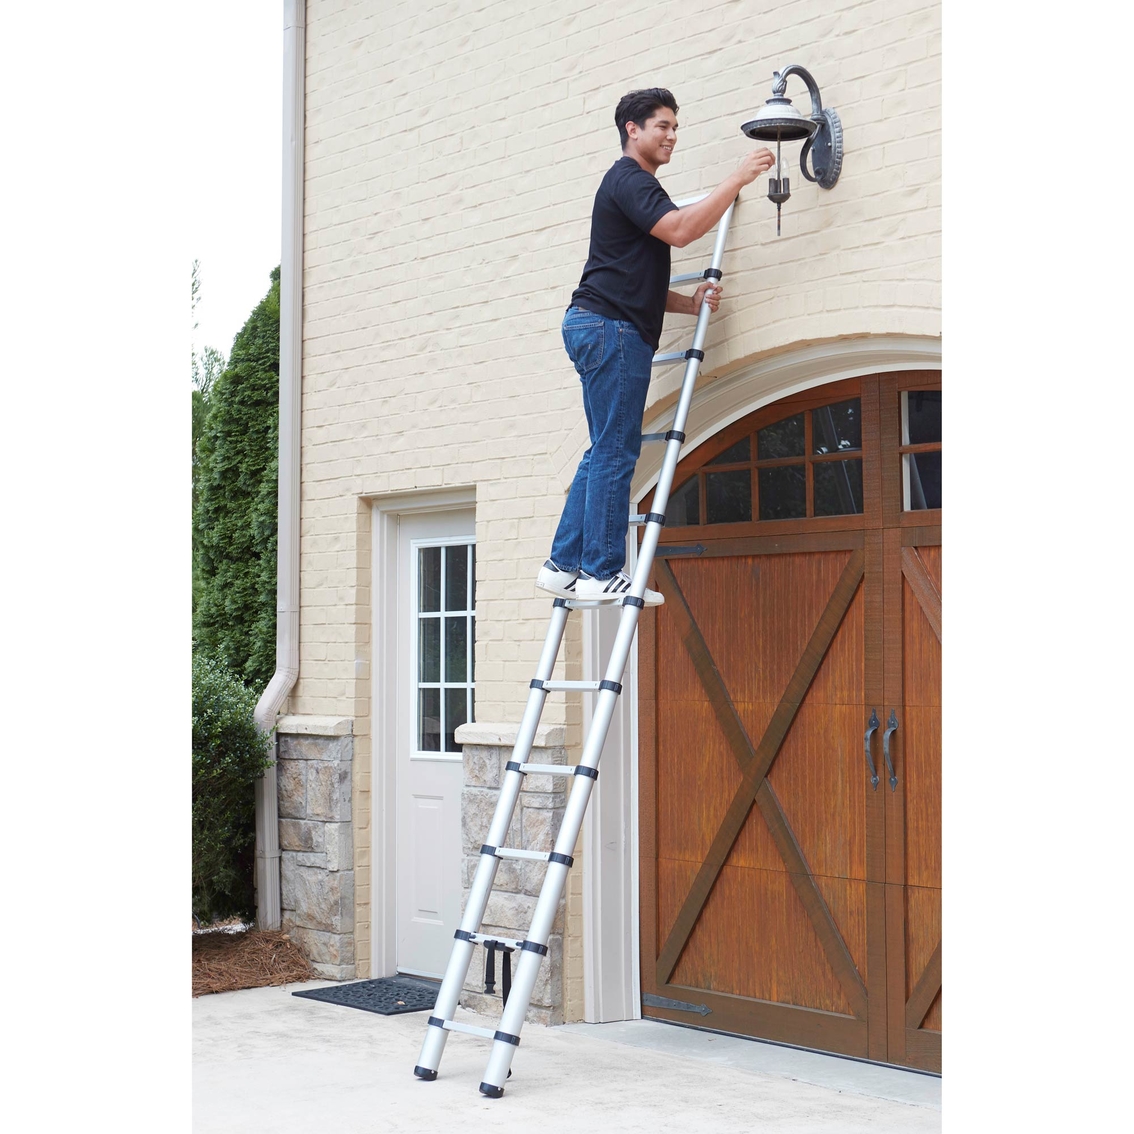 Cosco 14 Ft. Telescoping Ladder | Ladders & Stands | Patio, Garden Cosco 14 Ft Telescoping Ladder